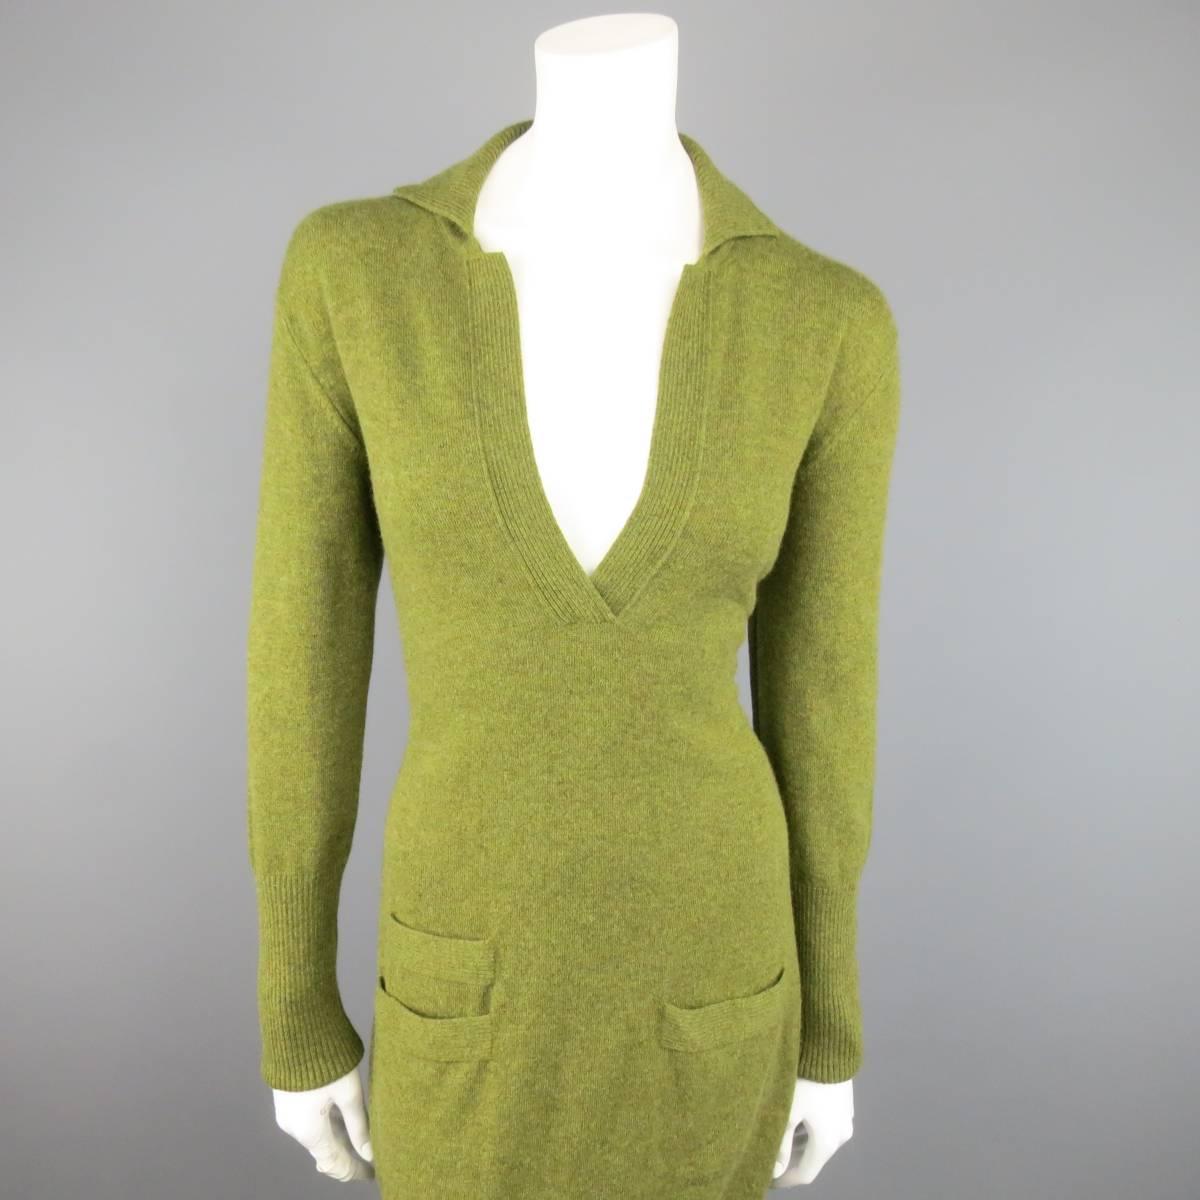 Vintage HERMES cashmere dress comes in a variegated olive knit and features a ribbed collar with plunging neckline, ribbed sleeves, patch pockets, and ribbed hem. Made in Scotland.
 
Excellent Pre-Owned Condition.
Marked: 42
 
Measurements:
